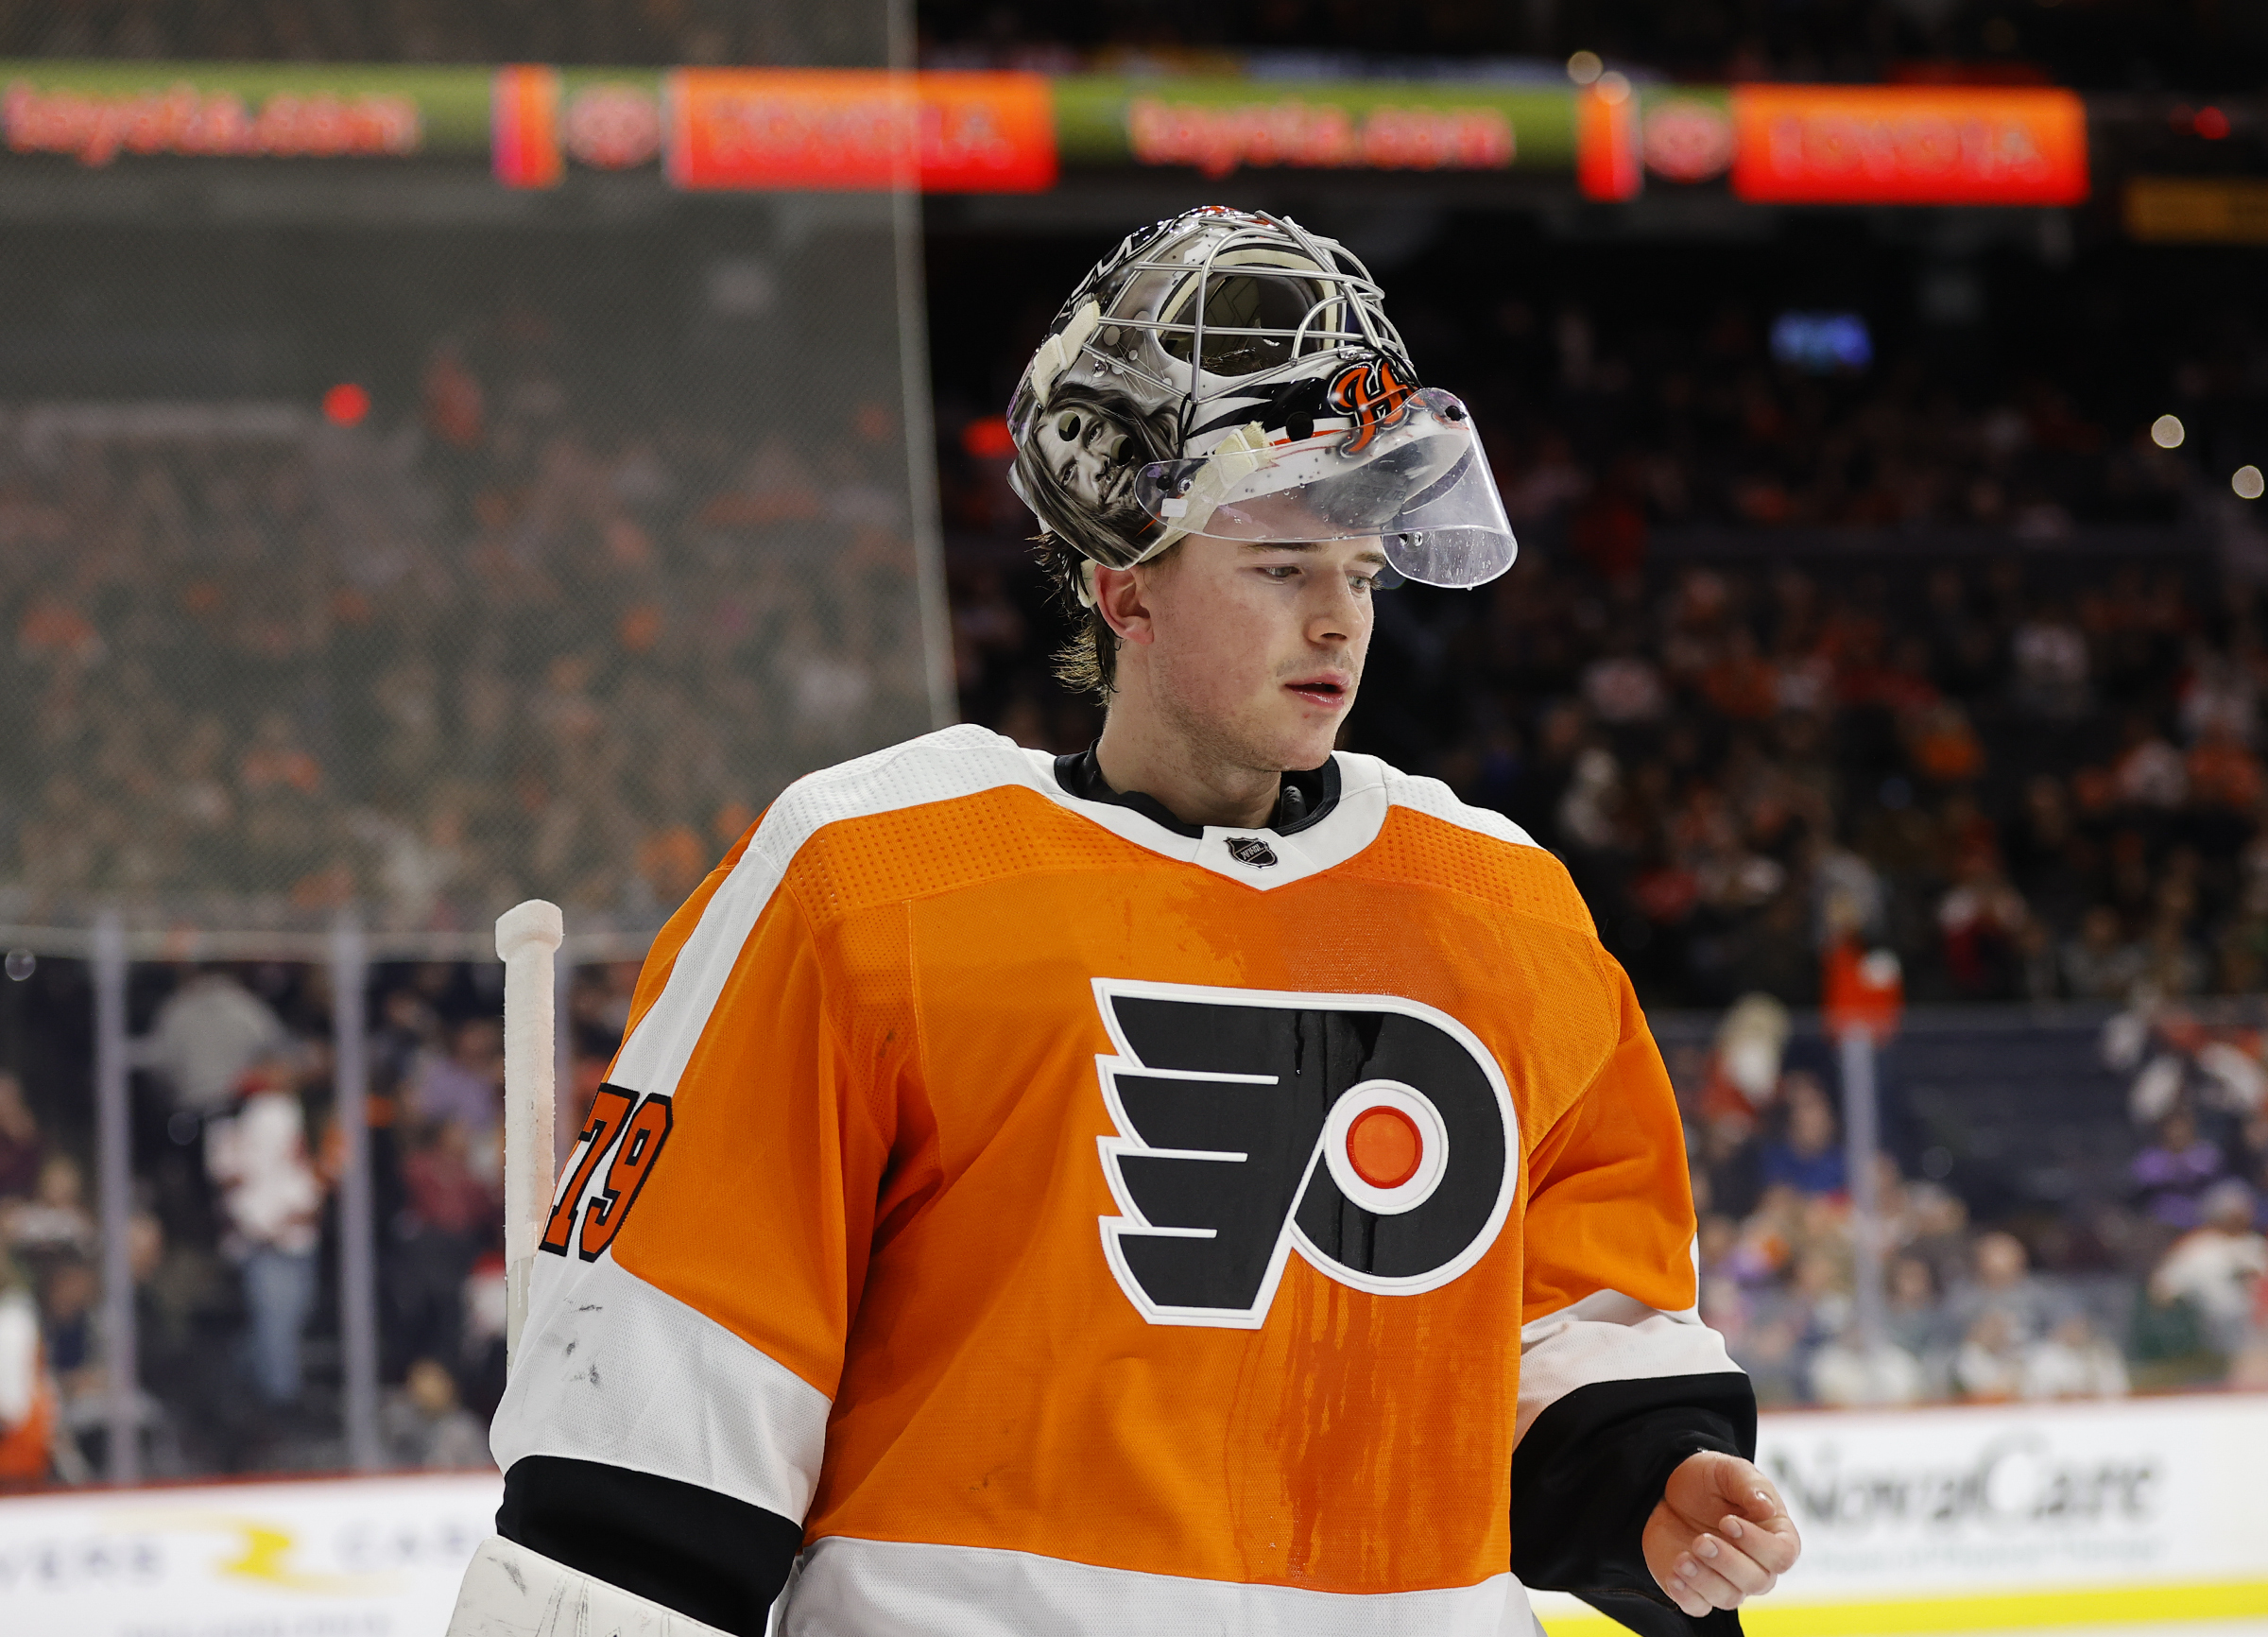 Flyers goalie Carter Hart to miss 2-3 weeks with abdominal strain